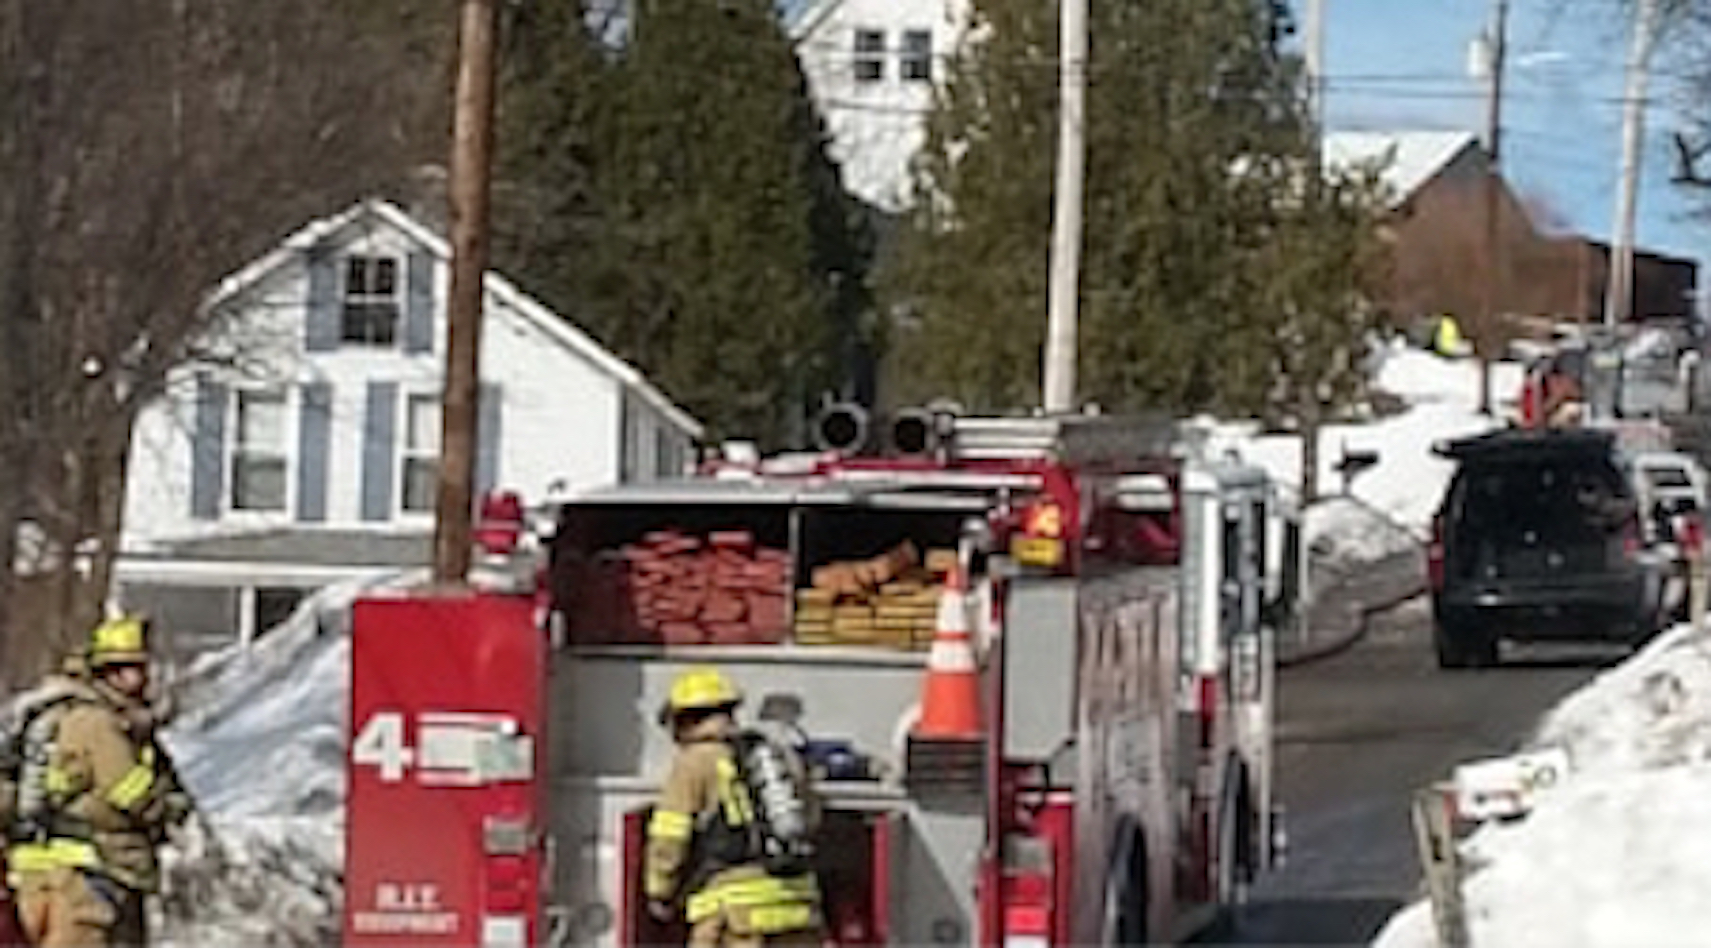 CFD Called to Basement Fire On Sunday